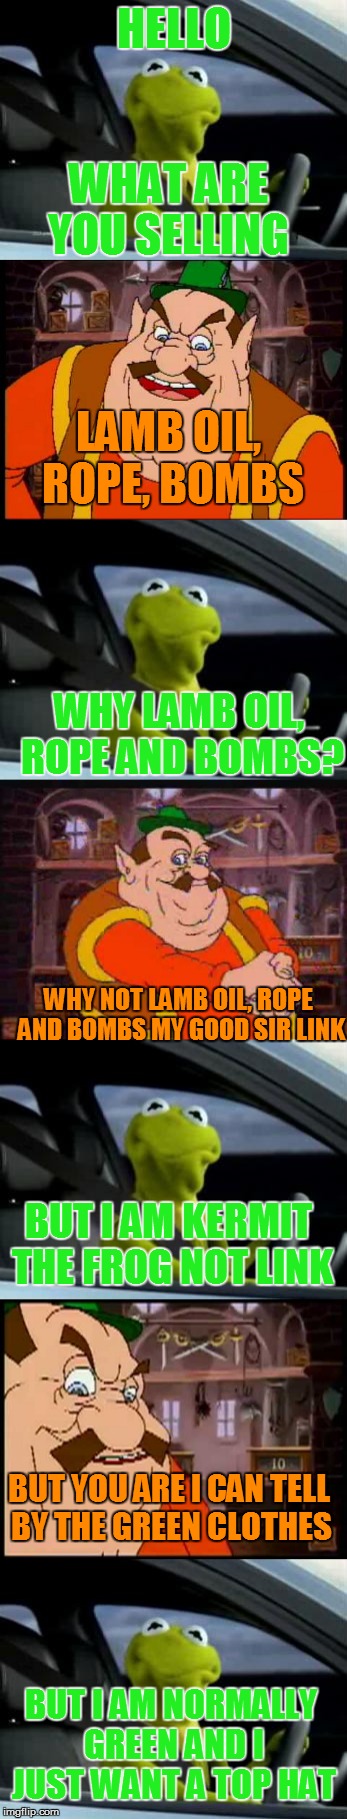 kermit and the bombs guy | HELLO; WHAT ARE YOU SELLING; LAMB OIL, ROPE, BOMBS; WHY LAMB OIL, ROPE AND BOMBS? WHY NOT LAMB OIL, ROPE AND BOMBS MY GOOD SIR LINK; BUT I AM KERMIT THE FROG NOT LINK; BUT YOU ARE I CAN TELL BY THE GREEN CLOTHES; BUT I AM NORMALLY GREEN AND I JUST WANT A TOP HAT | image tagged in cdi,kermit the frog,memes,funny,long,shopping | made w/ Imgflip meme maker